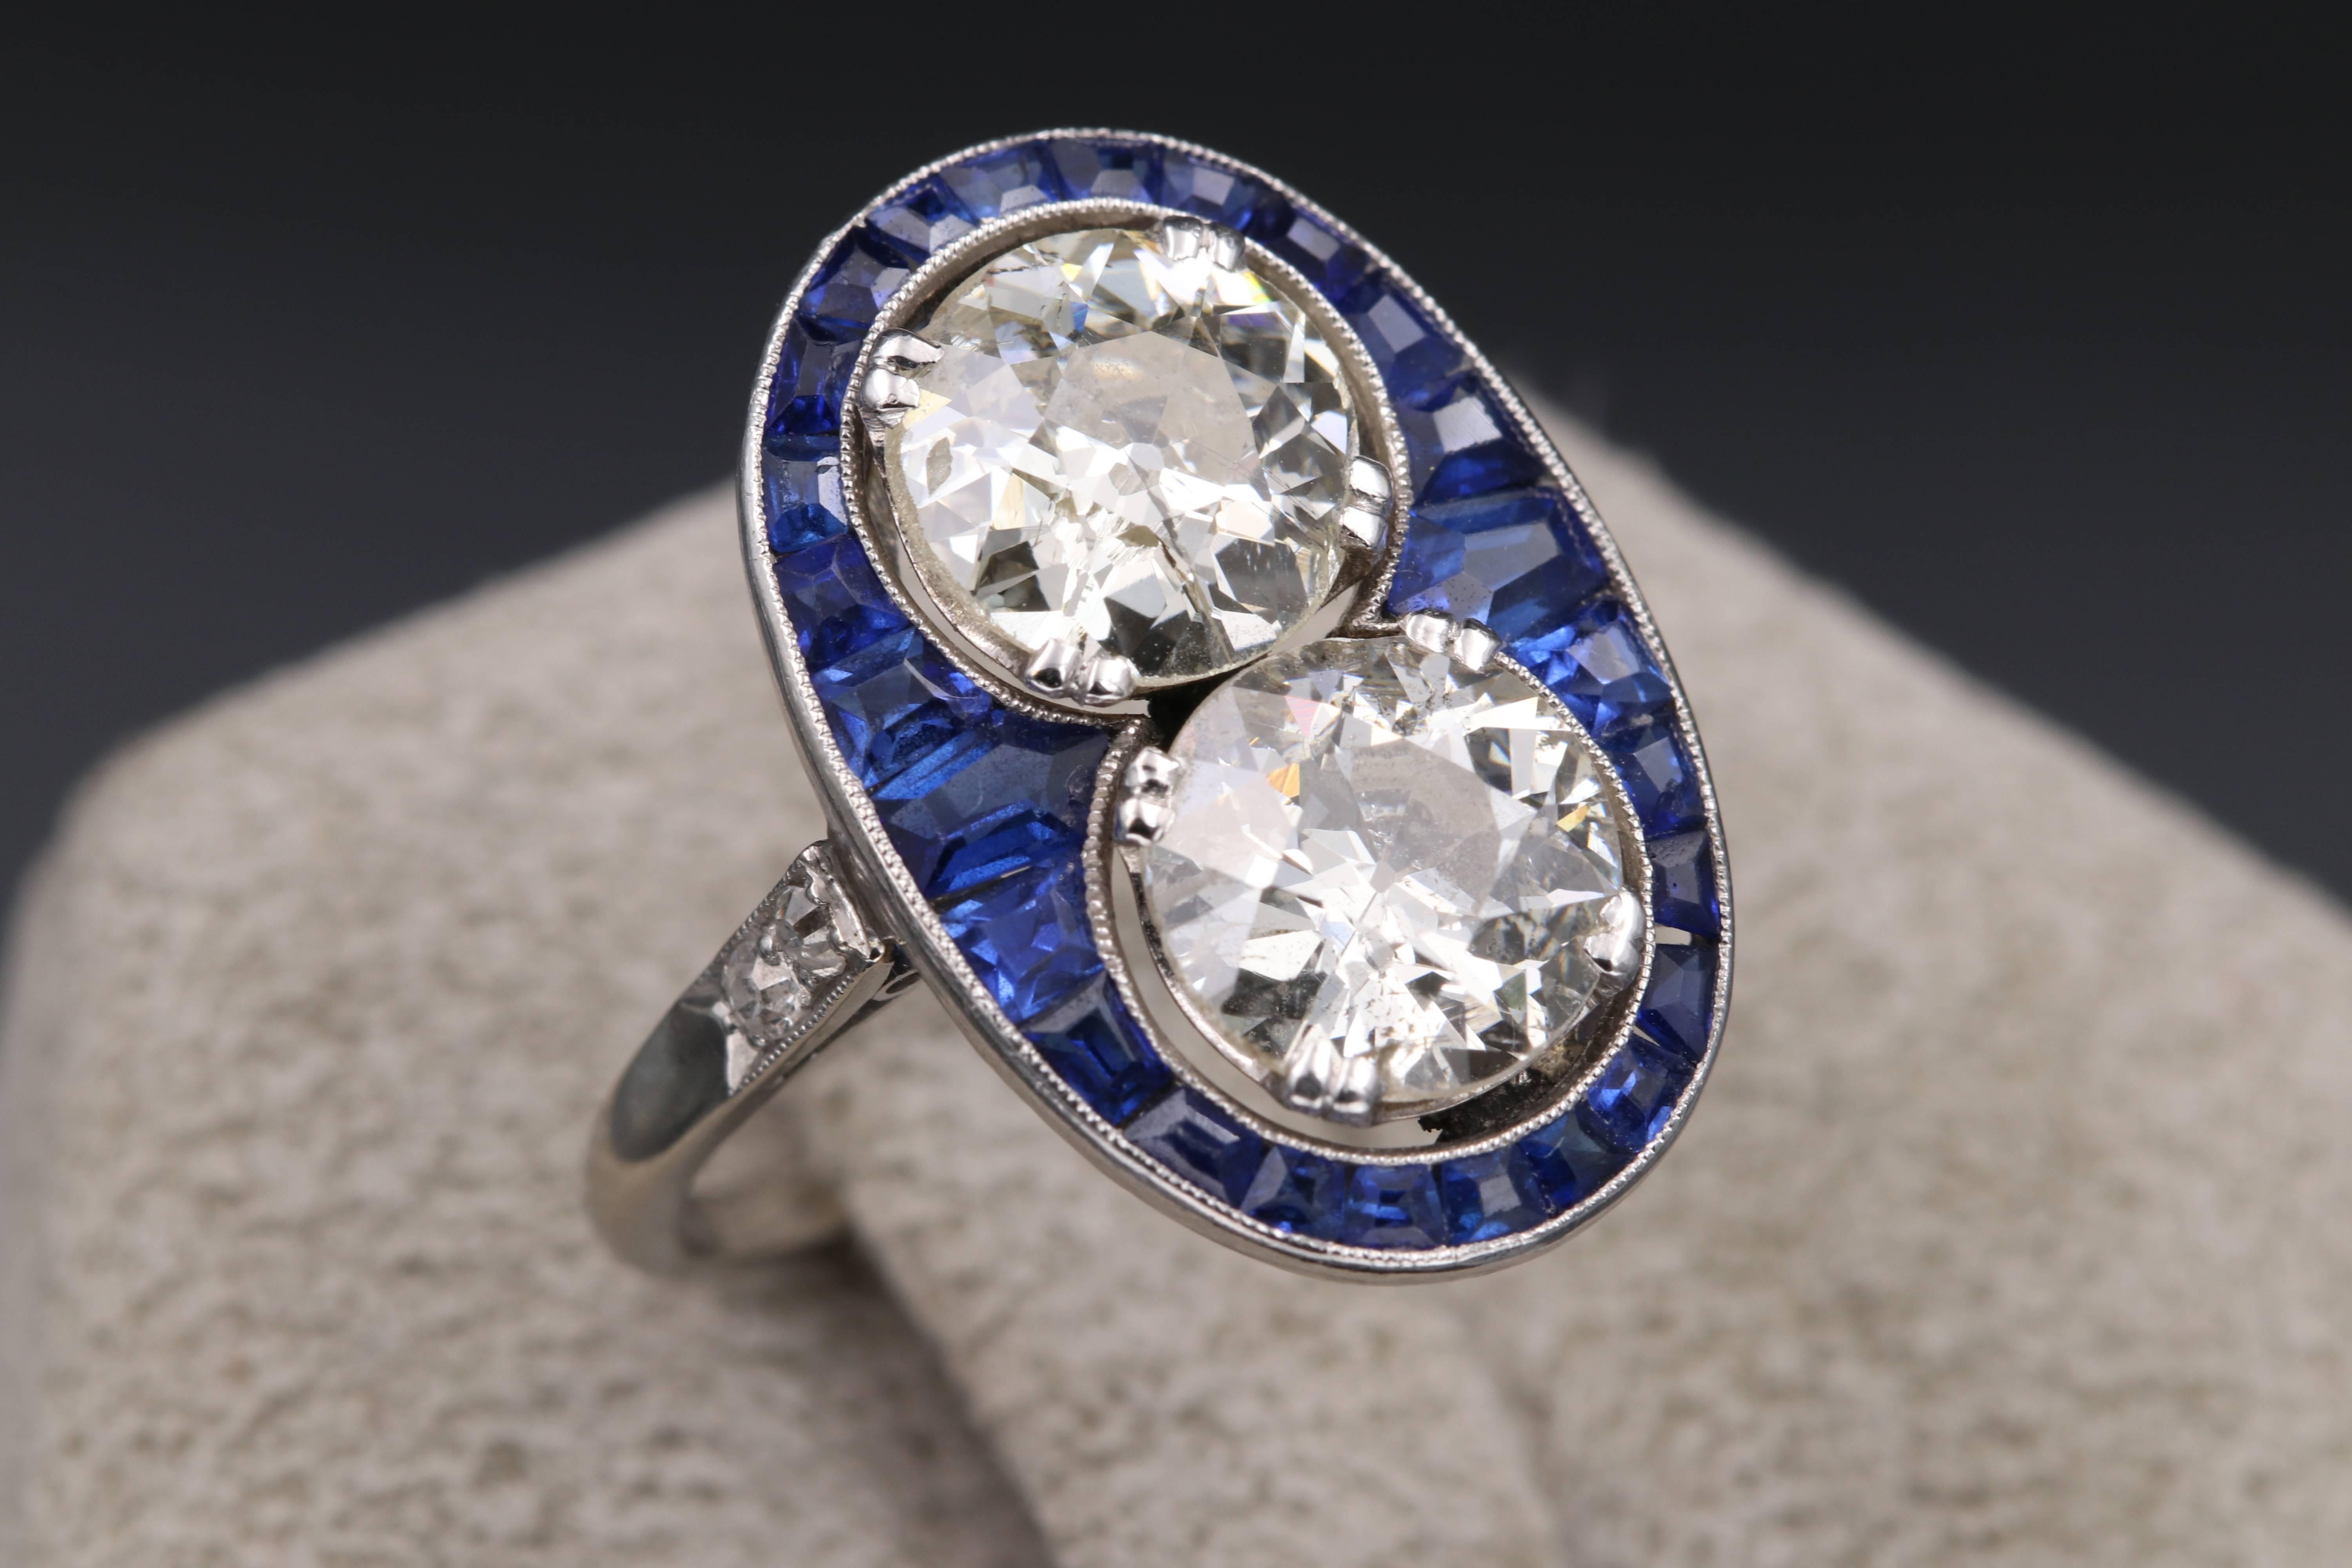 Beautiful and elegant toi et moi ring. French made circa 1920, Made of platinum, natural sapphires calibrés ans two diamonds. This design is exquisite and unique. 
The diamonds weights approximately 1.80 /2 carats each. 
The color is I/J and the